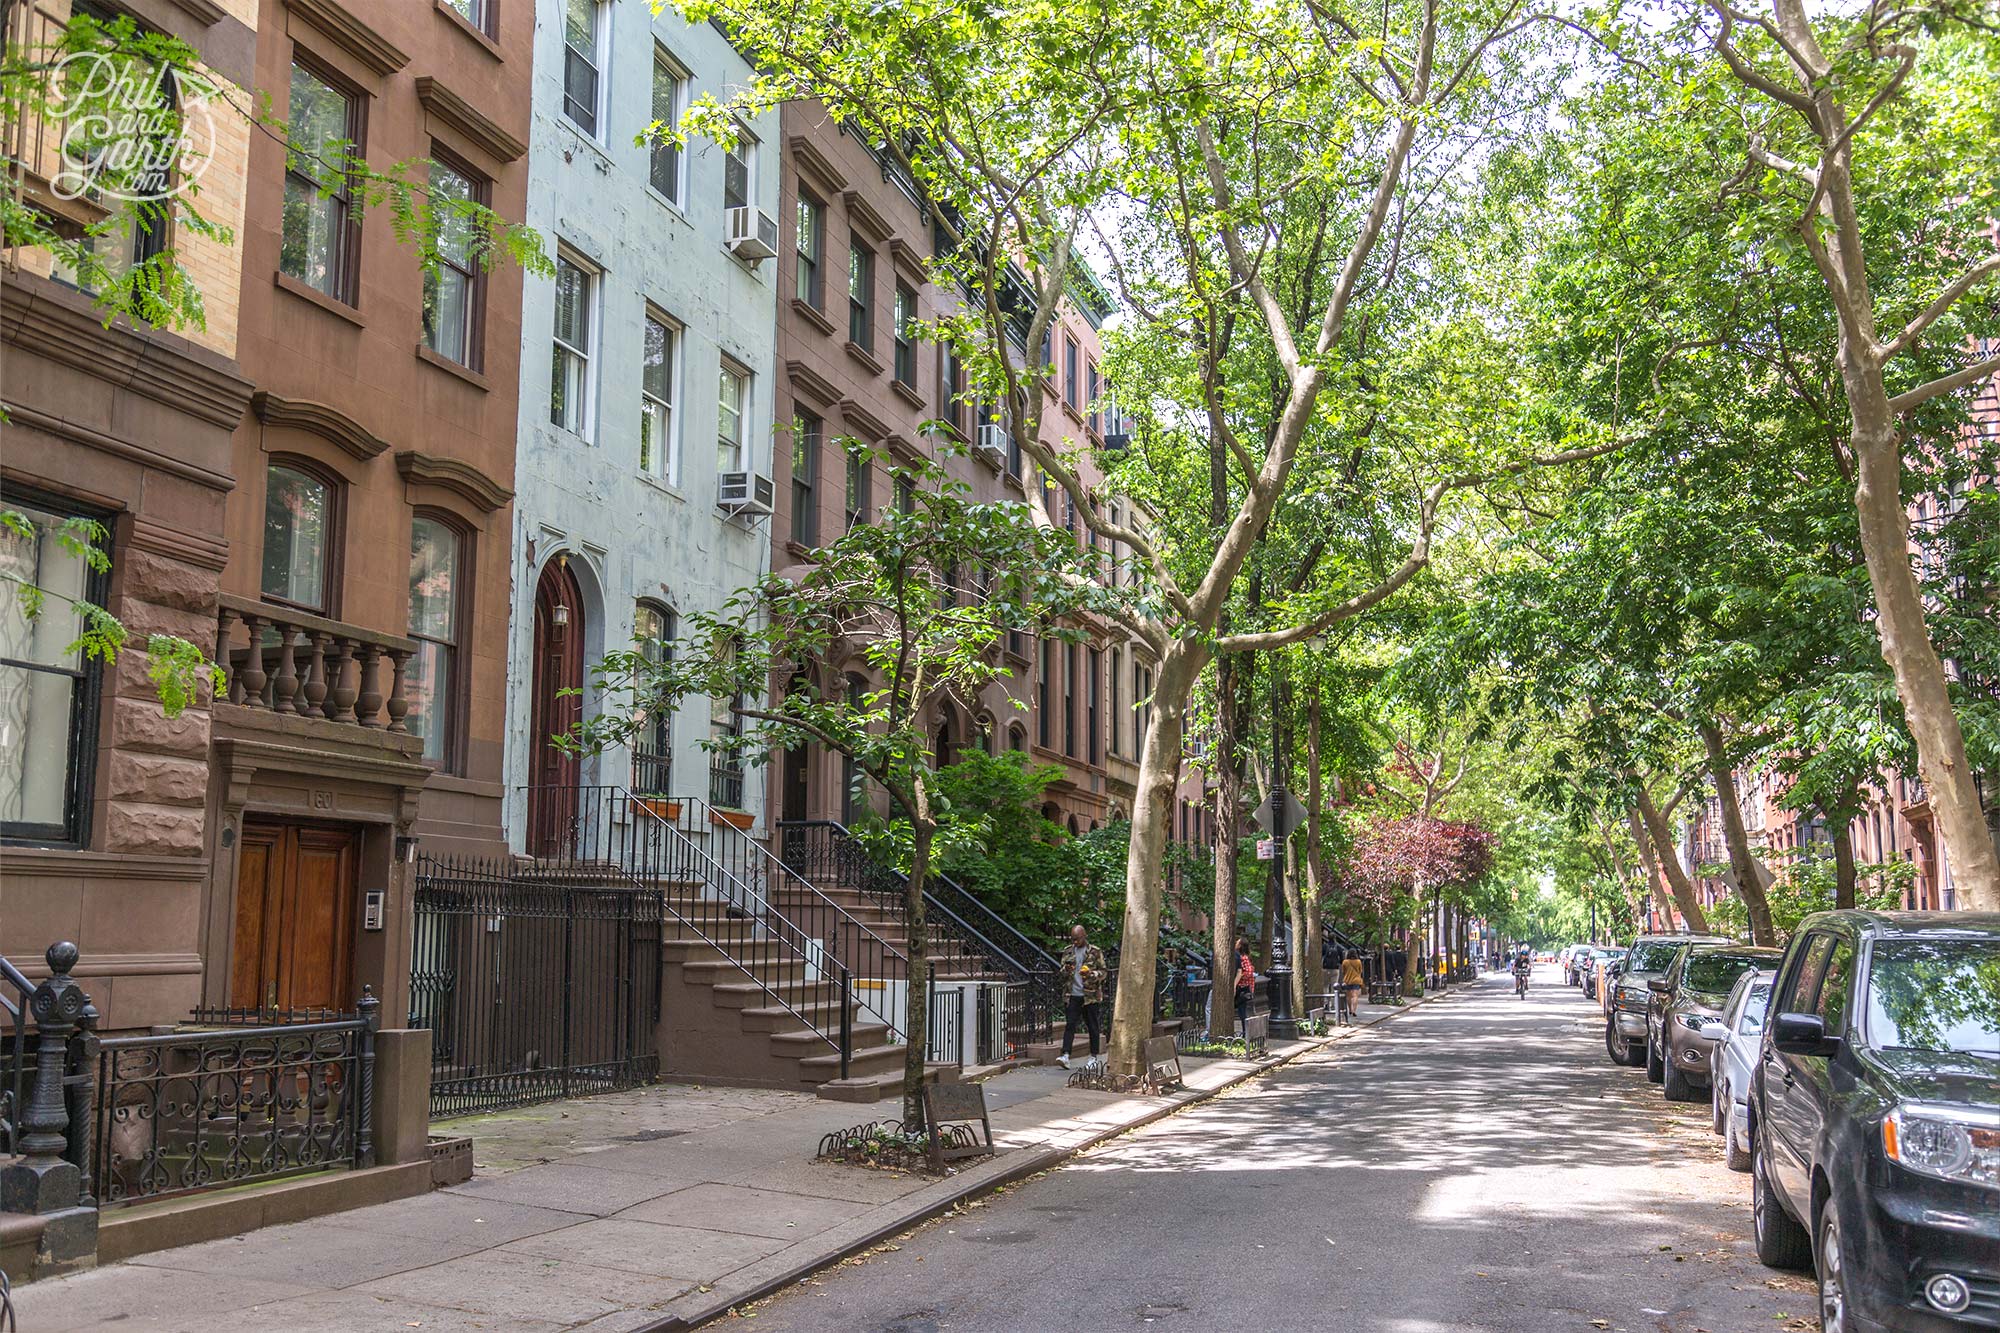 The delightful Brownstone houses of Greenwich Village